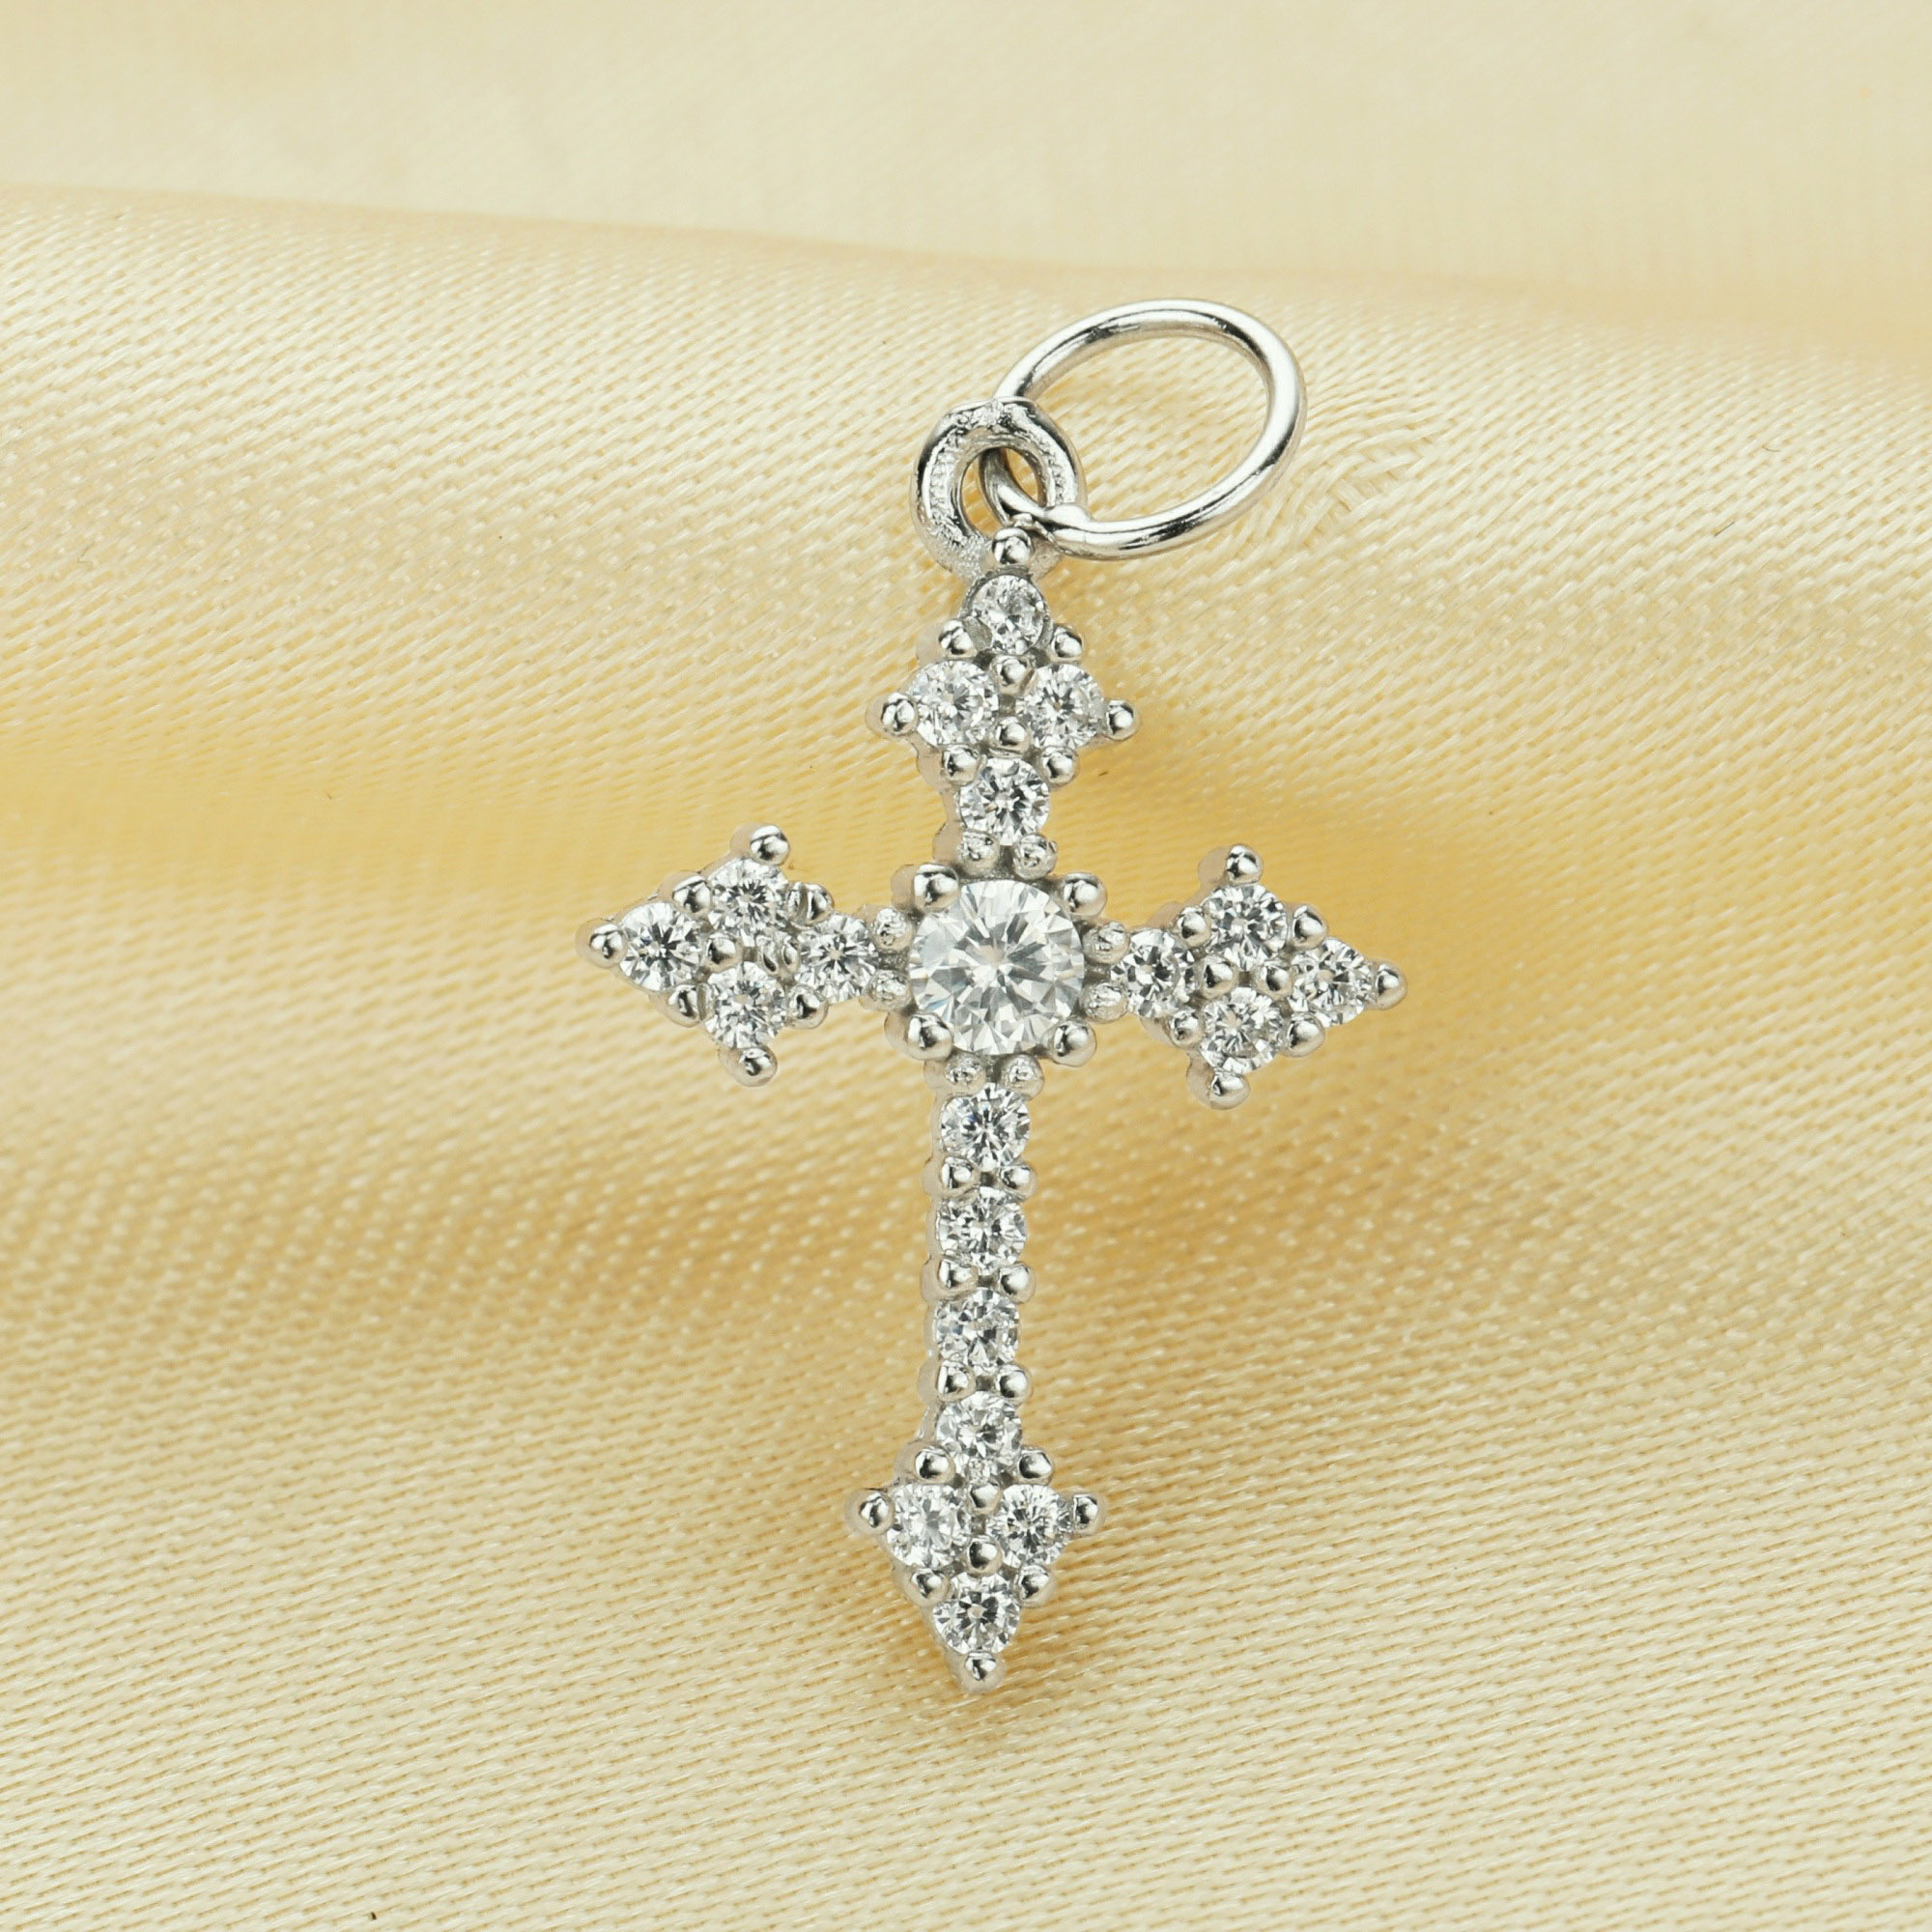 12x15MM Pave CZ Stone Cross Charm,Solid 925 Sterling Silver Pendant Charm,DIY Pendant Charm Supplies 1431191 - Click Image to Close